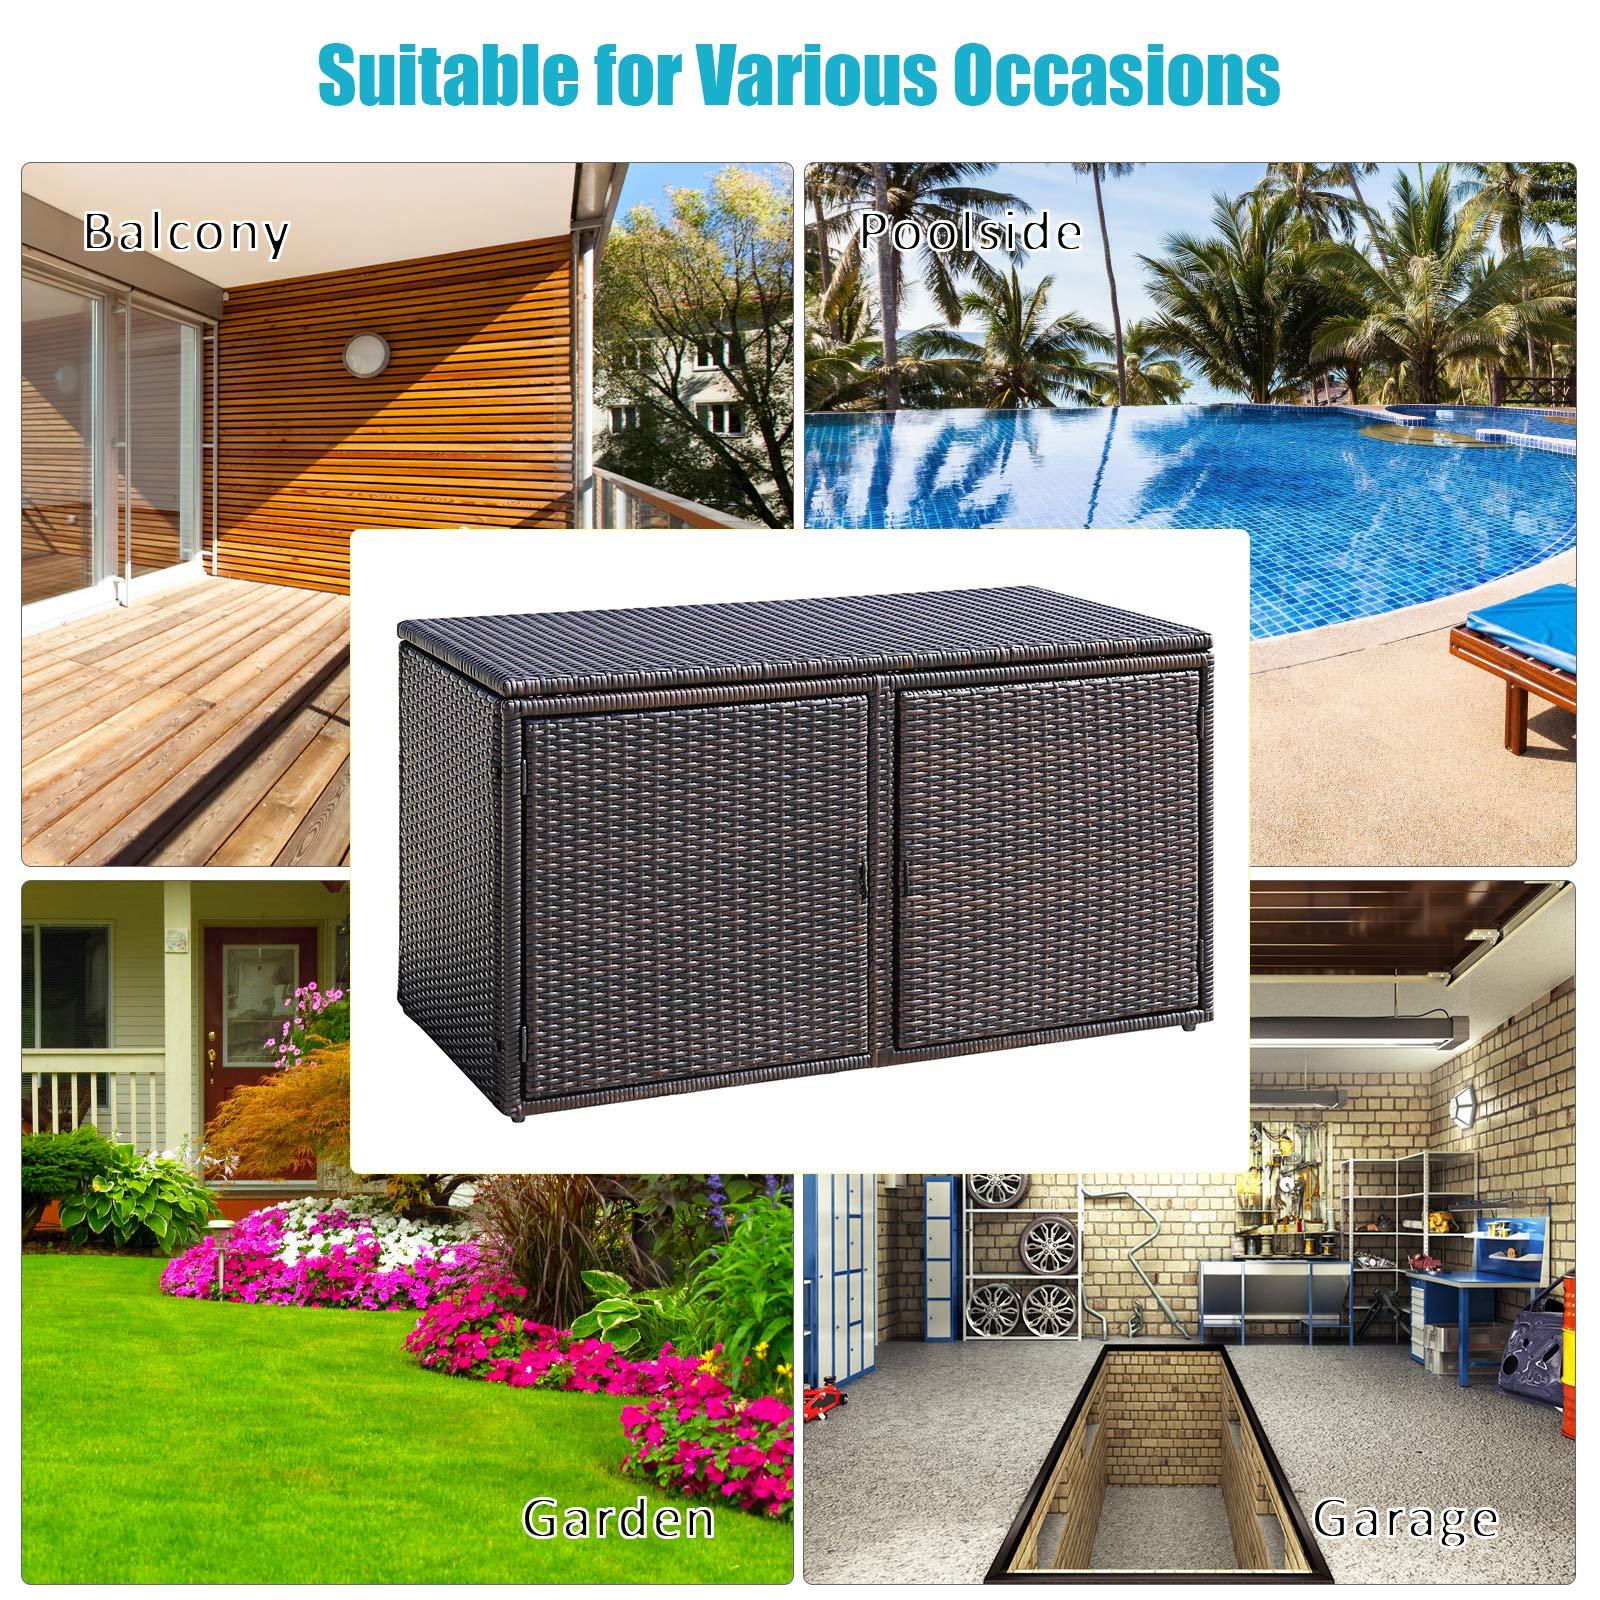 HAPPYGRILL Deck Box Outdoor Wicker Storage Box Cabinet 88 Gallon Storage Container Bin Box for Toys Furniture Tools in Garden Balcony Porch Yard - CookCave